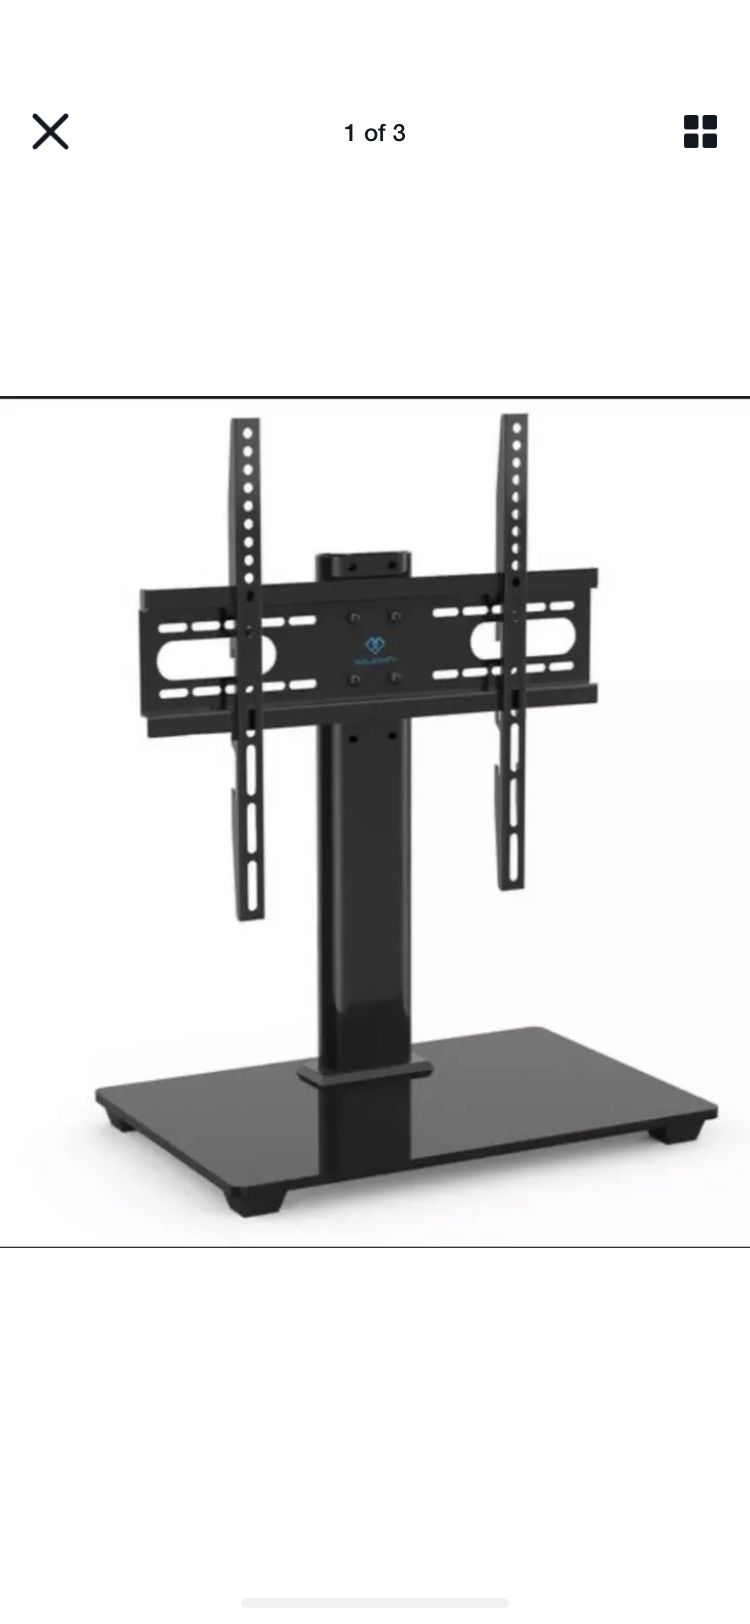 Perlesmith PSTVS04 Universal TV Stand for 37-55 Inch LCD LED TV - Black